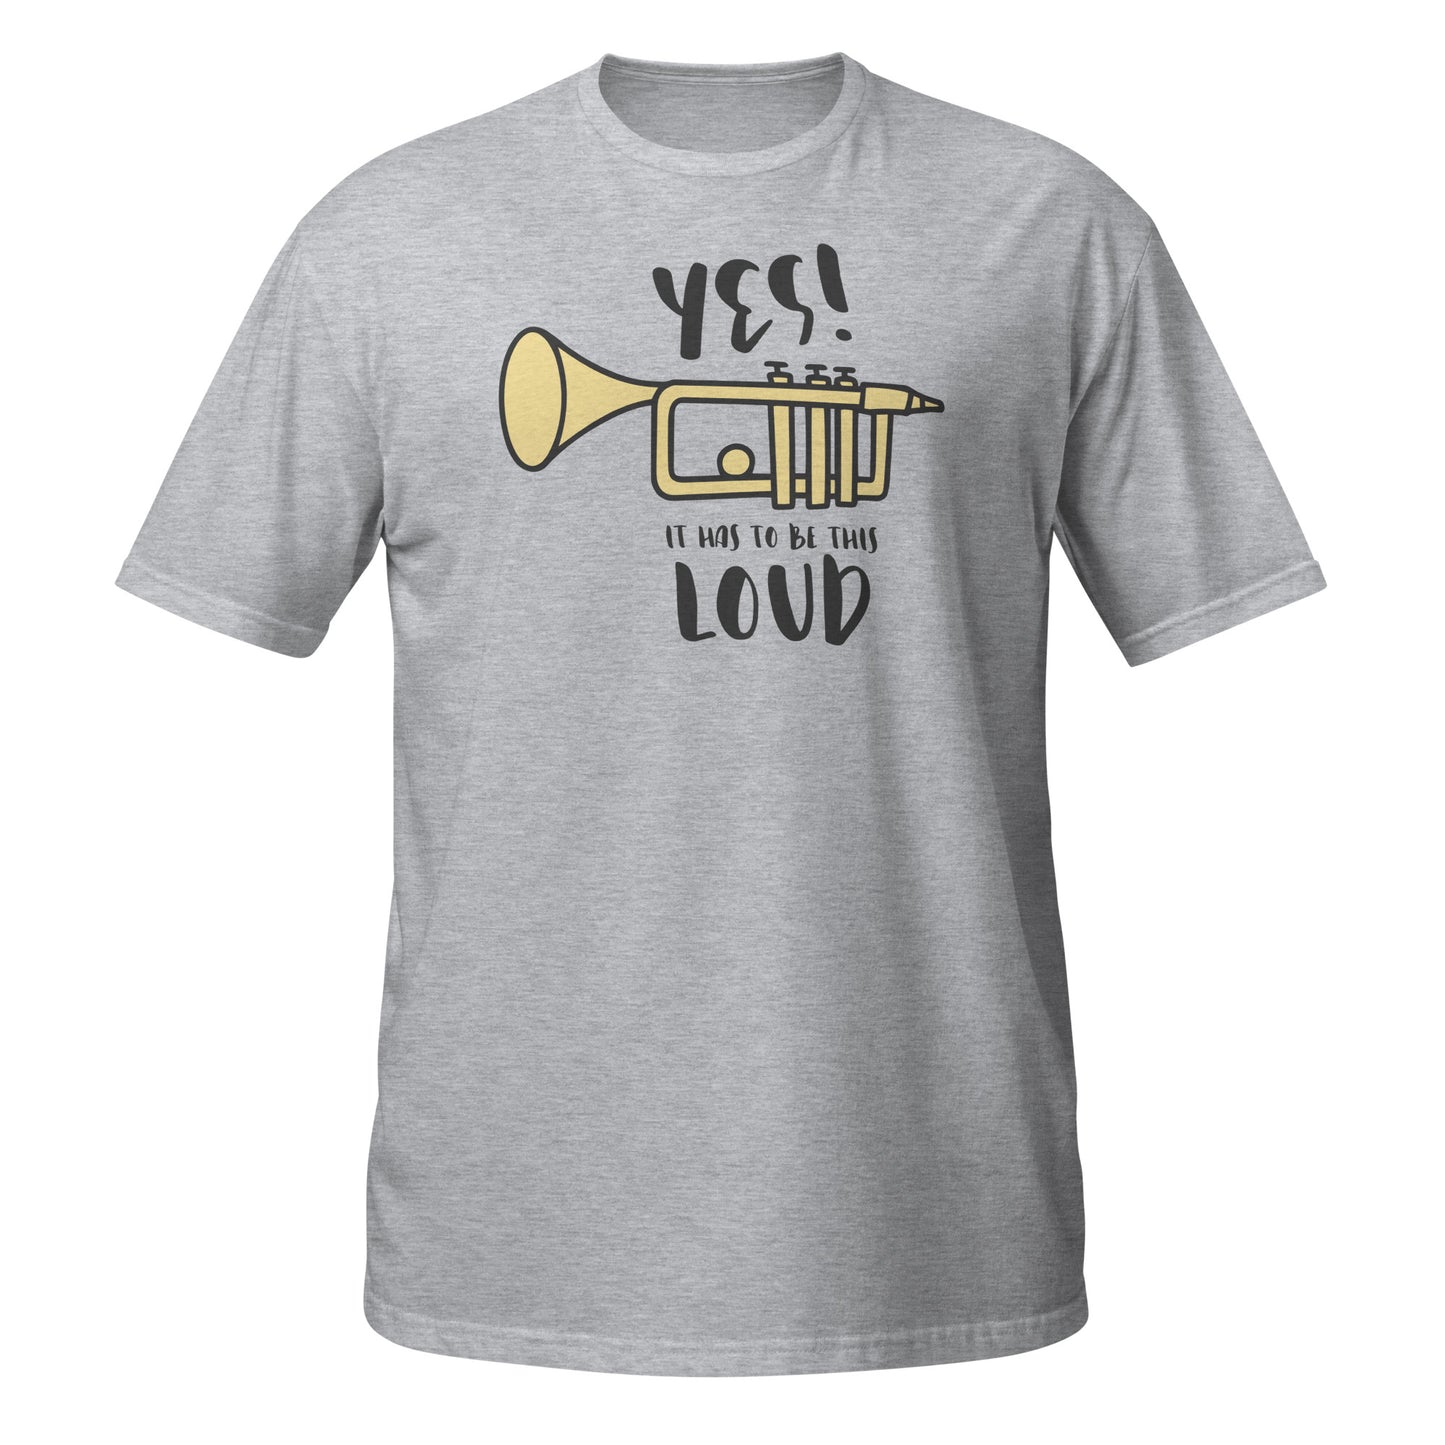 Yes! It Has to be This Loud T-Shirt